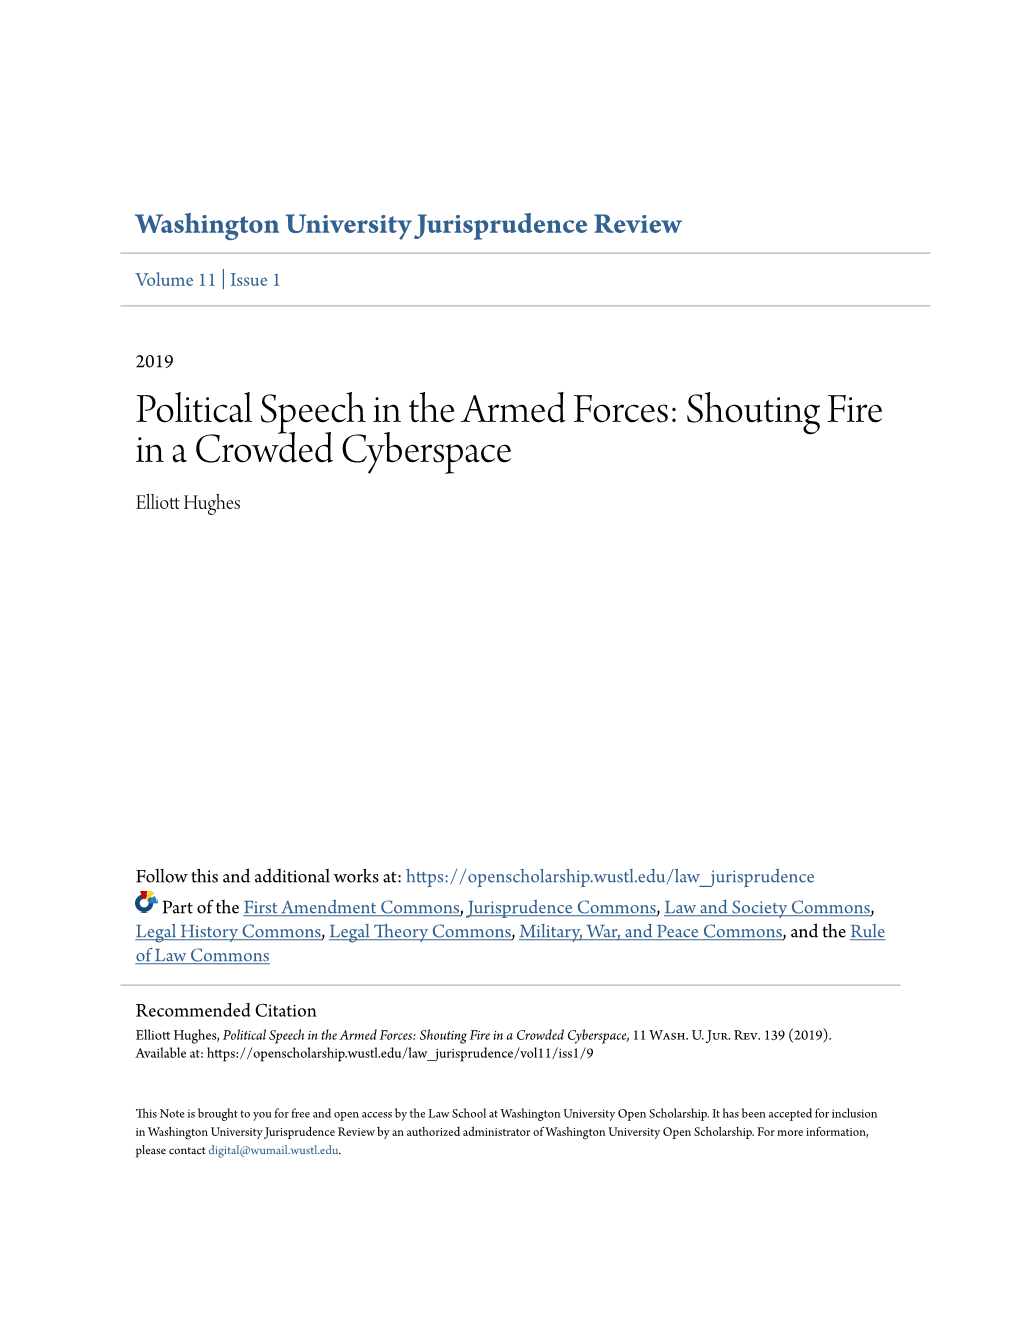 Political Speech in the Armed Forces: Shouting Fire in a Crowded Cyberspace Elliott Uh Ghes